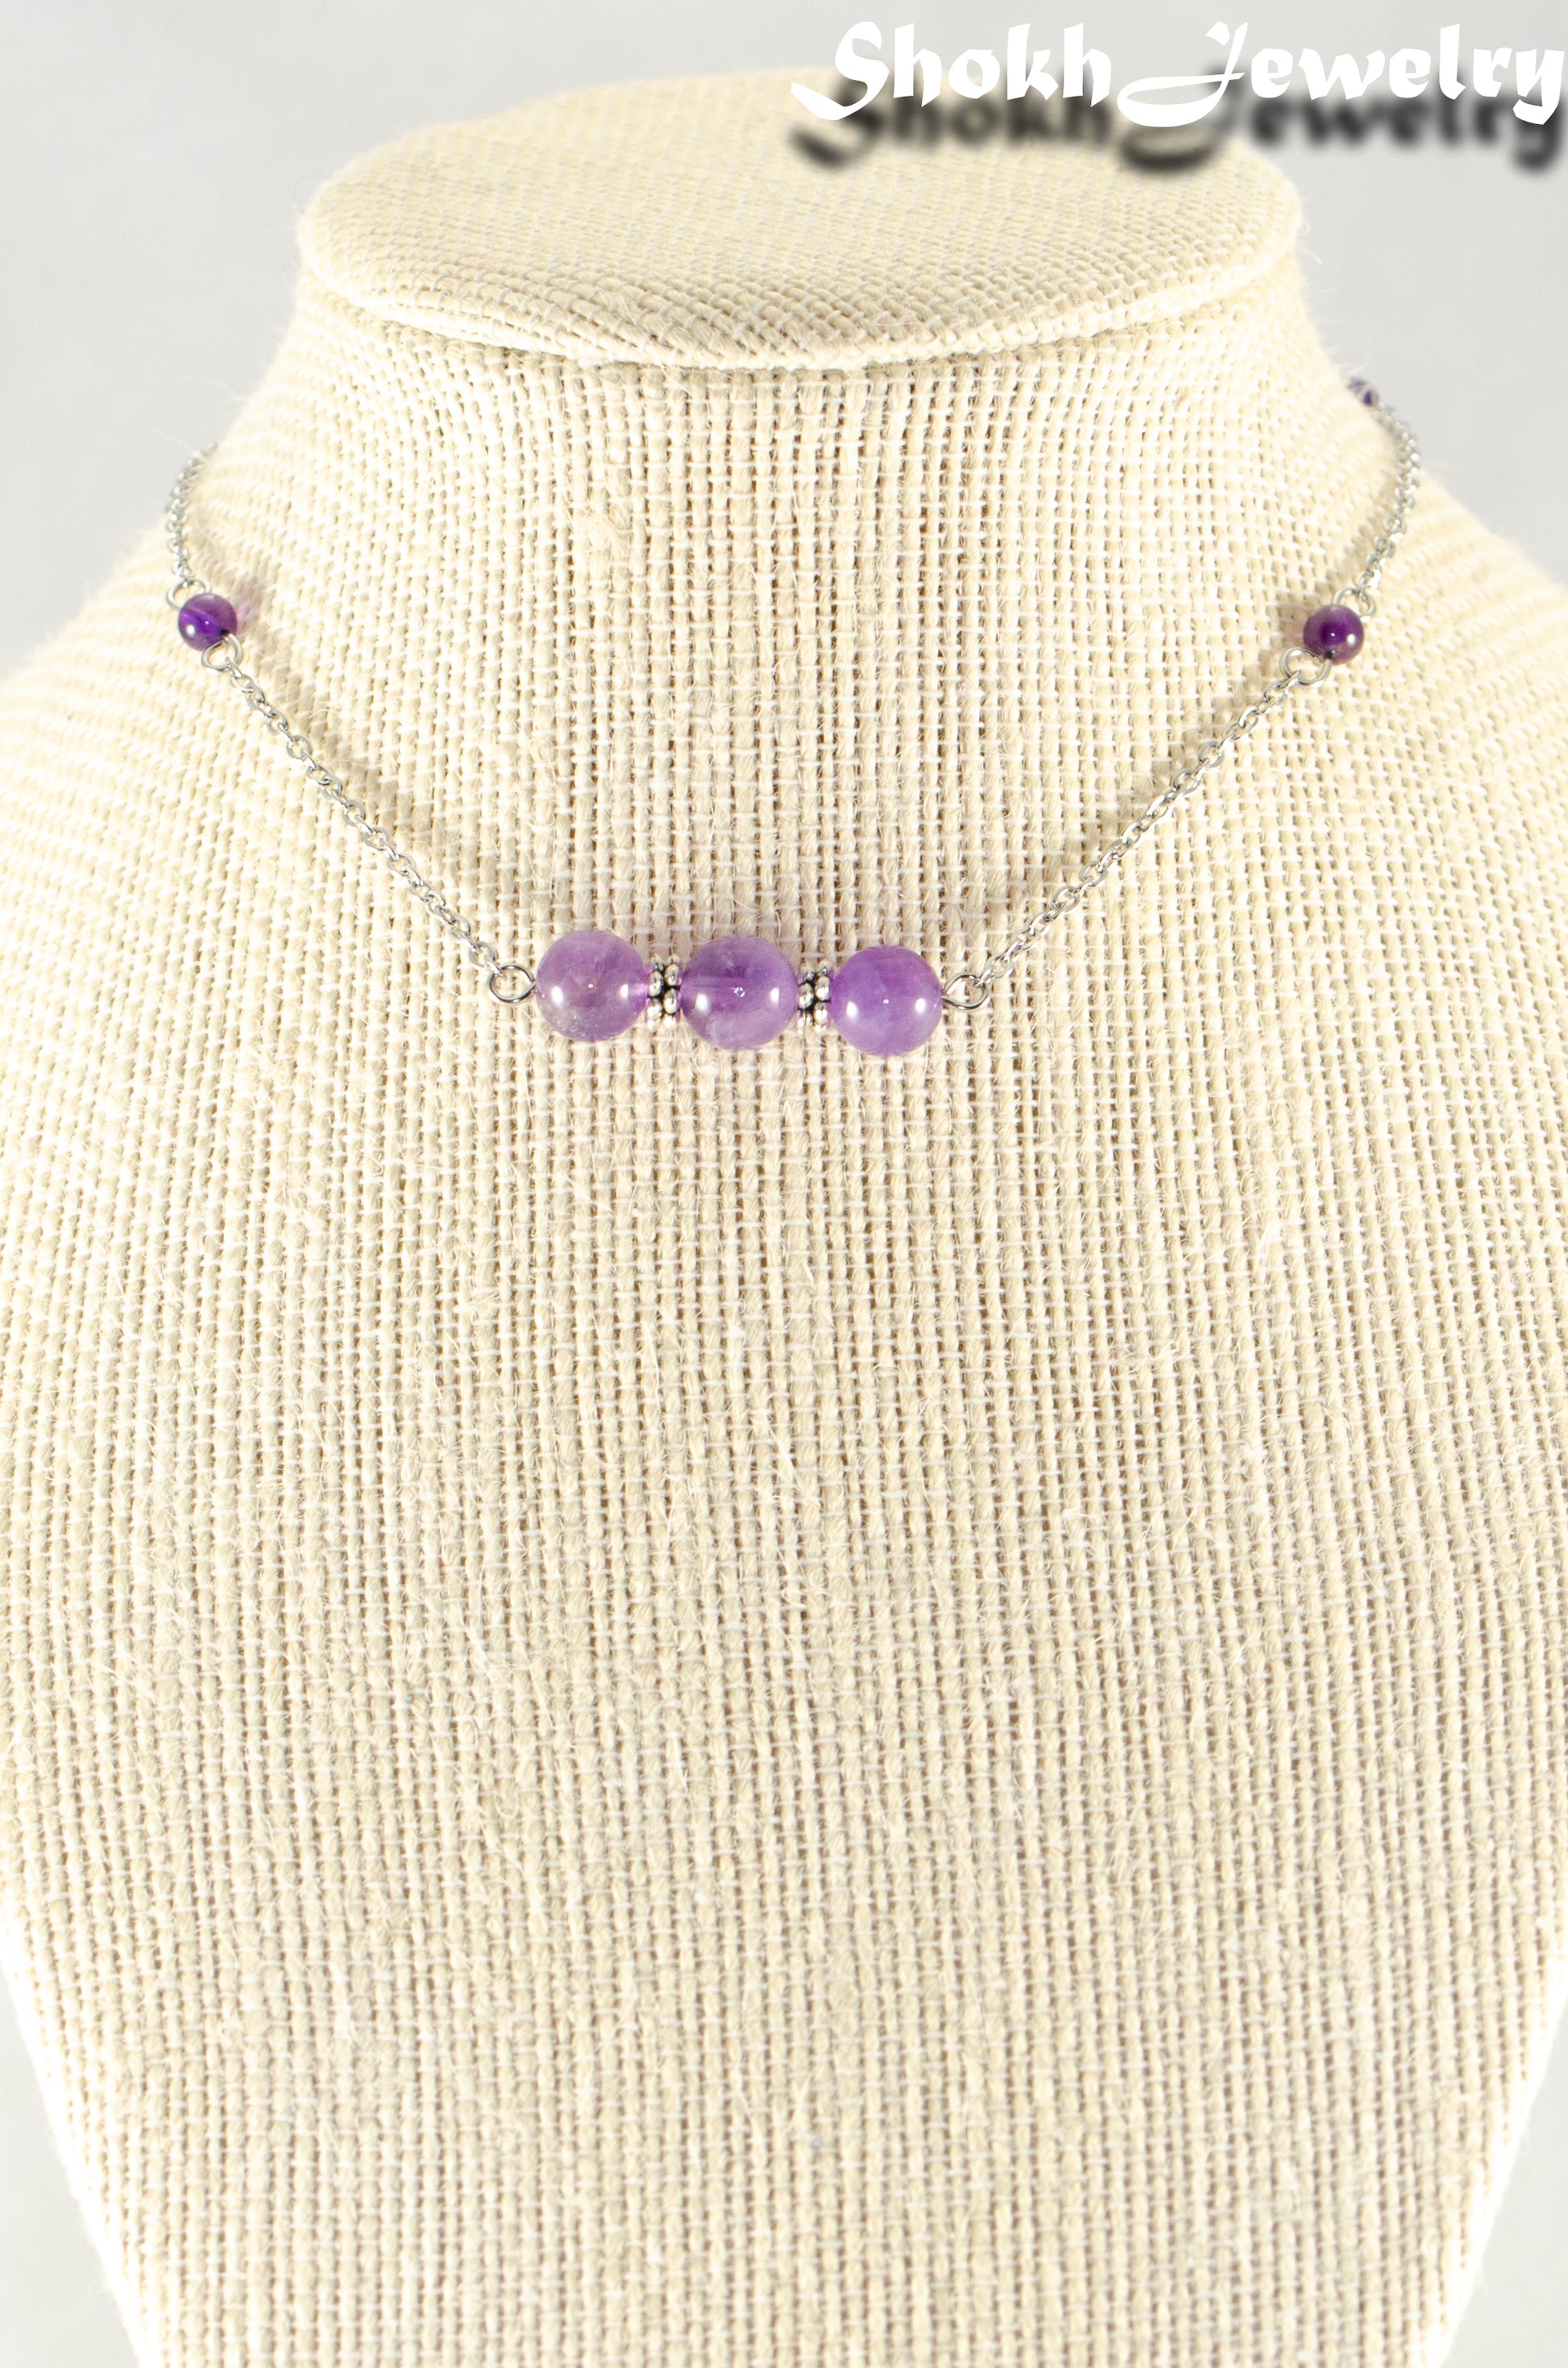 Close up of Natural Amethyst and Chain Choker Necklace.